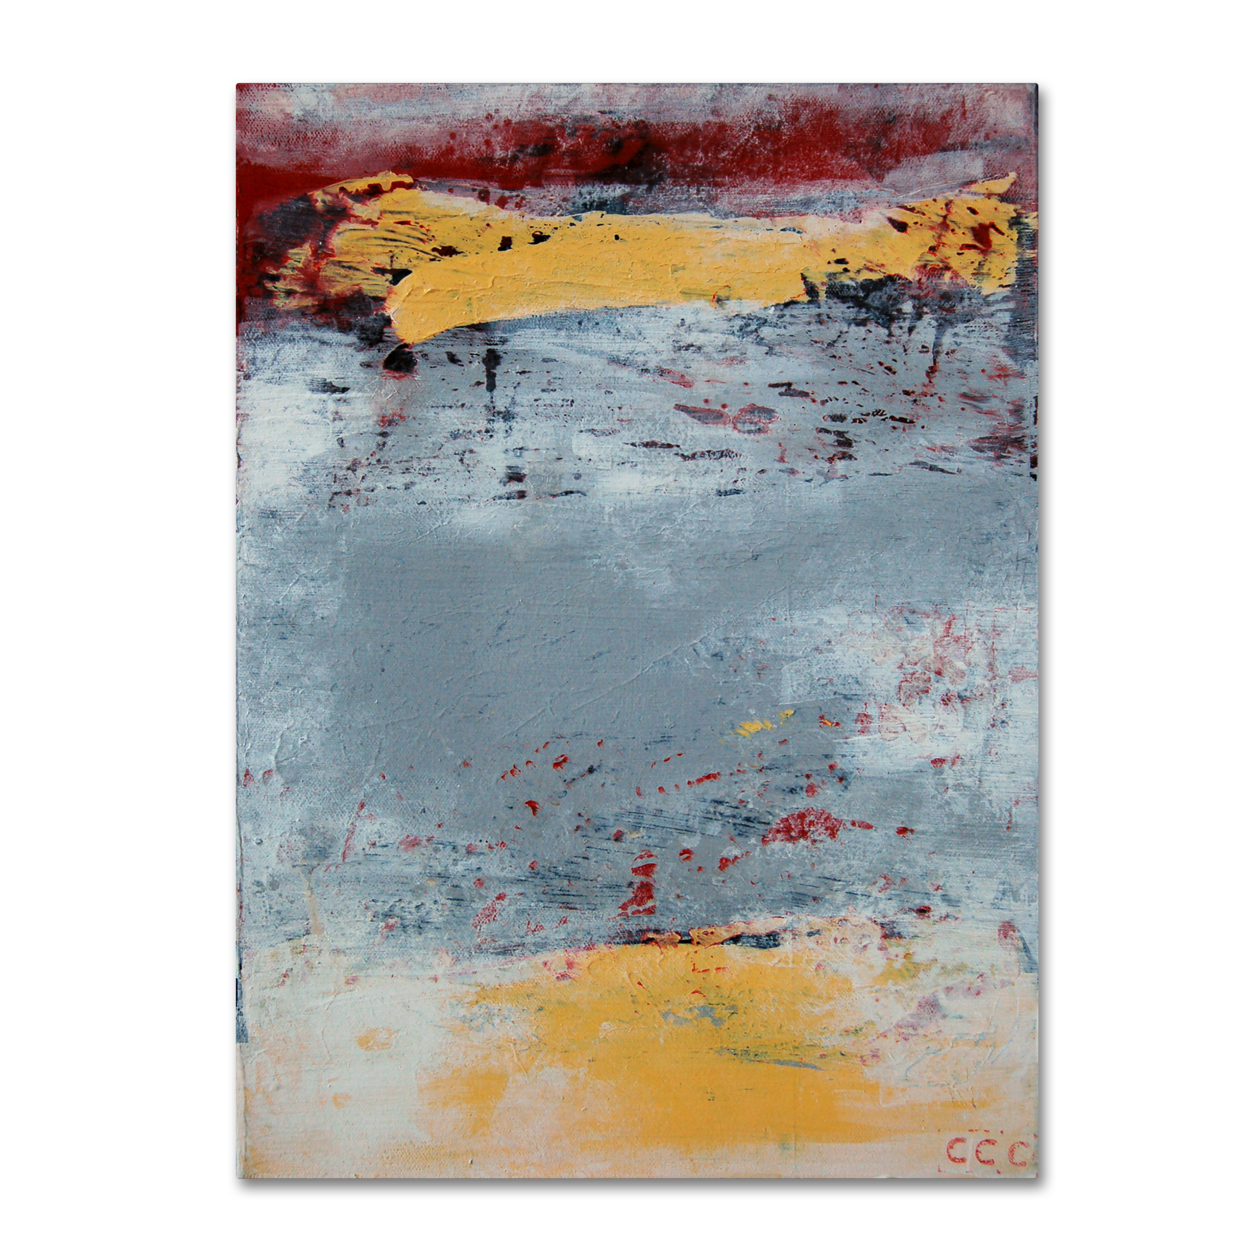 Nicole Dietz 'The Gray Yellow And Red One' Canvas Wall Art 35 X 47 Inches